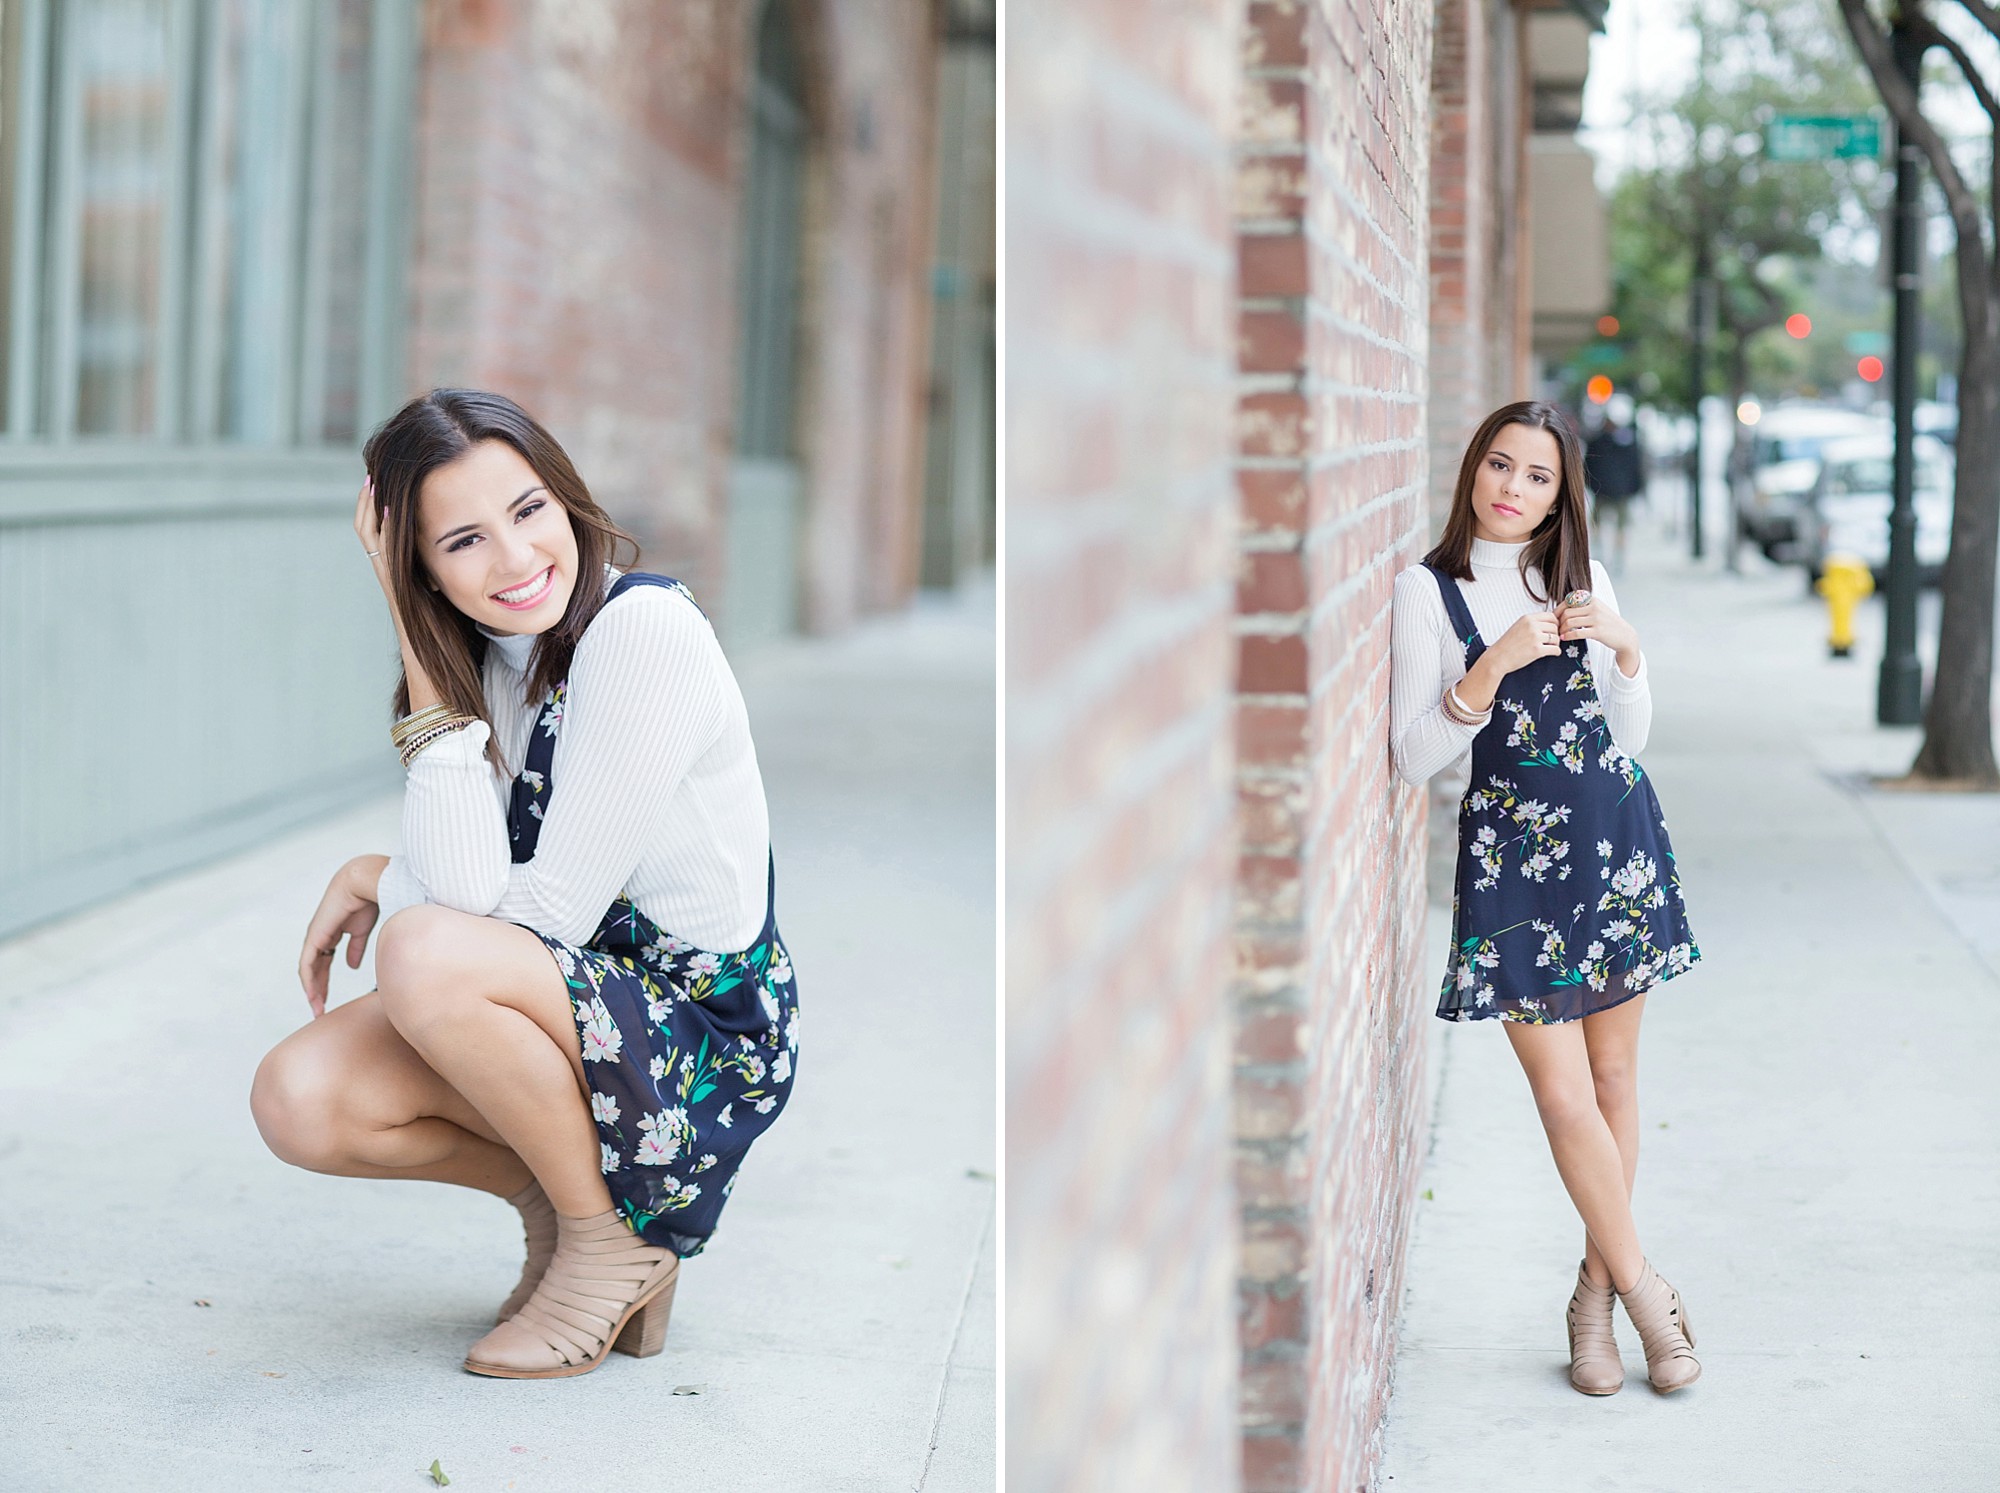 Cute and modern posing ideas for girl senior pictures